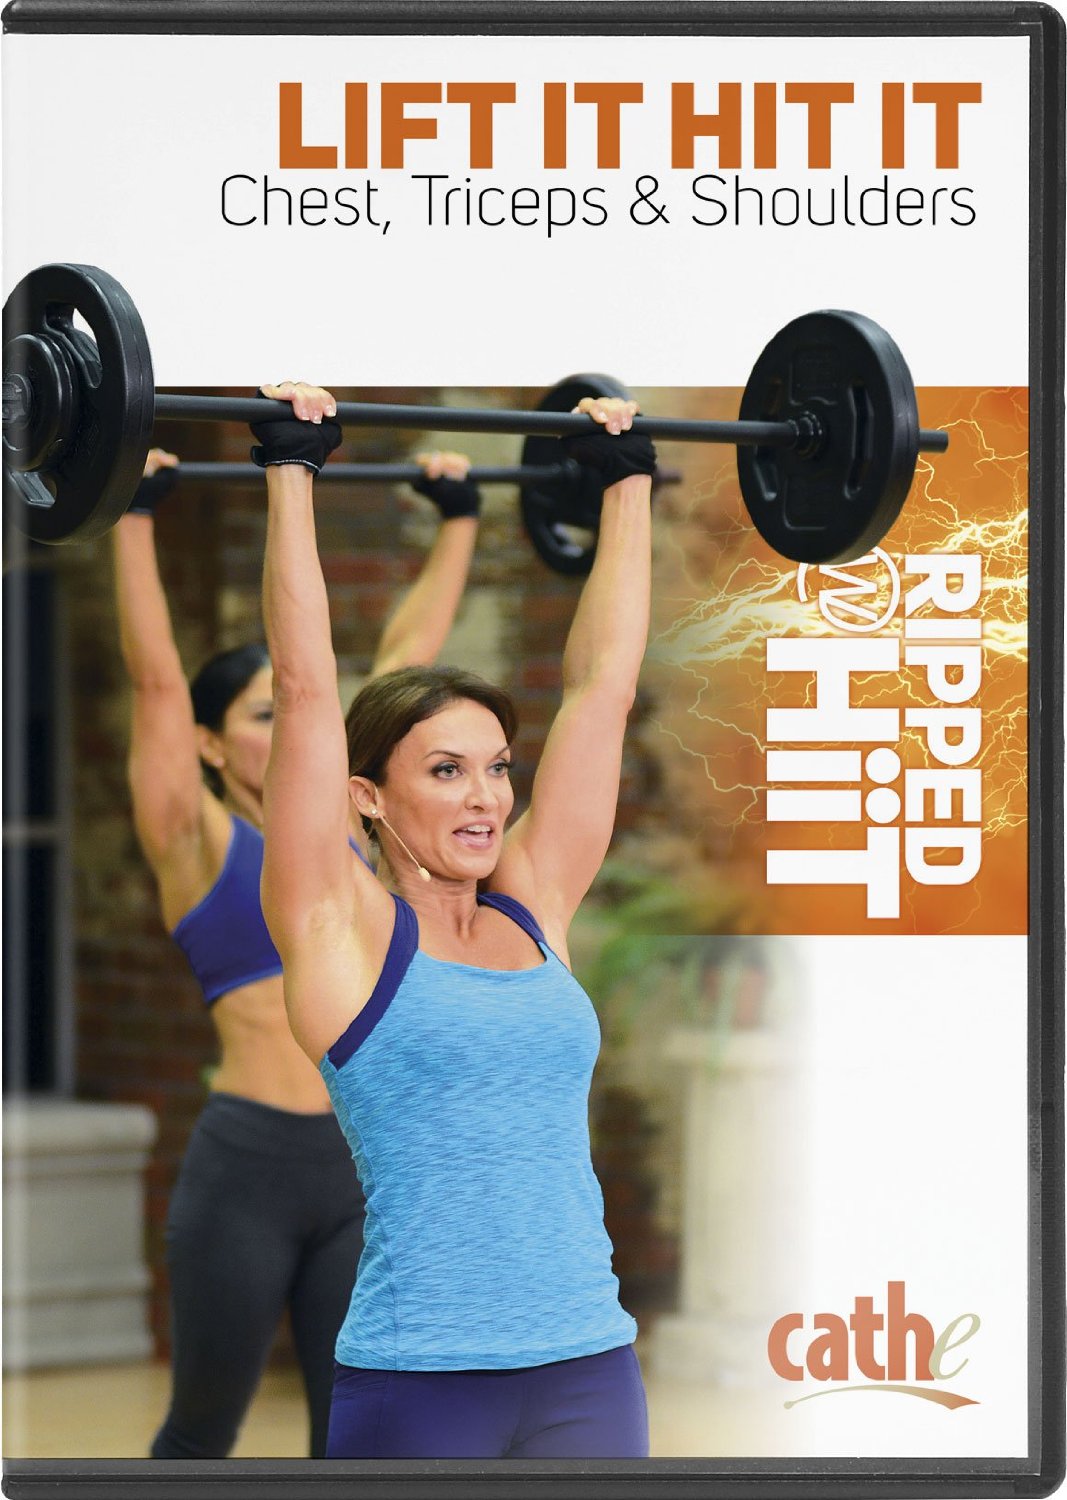 Ripped with HIIT: Lift It Hit It Chest, Triceps & Shoulders – 2